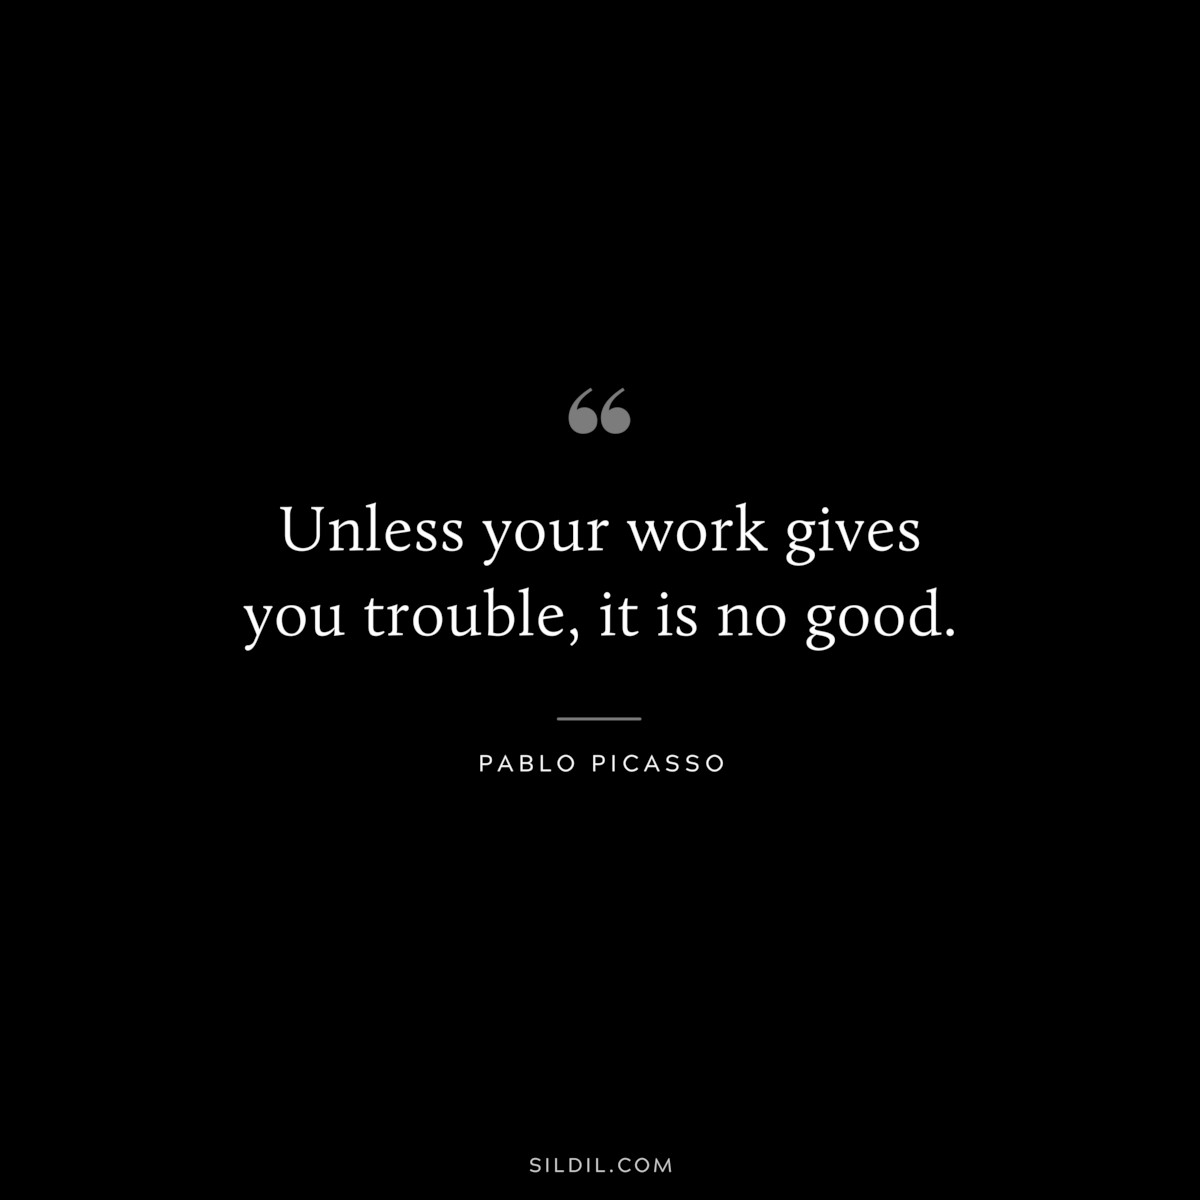 Unless your work gives you trouble, it is no good. ― Pablo Picasso